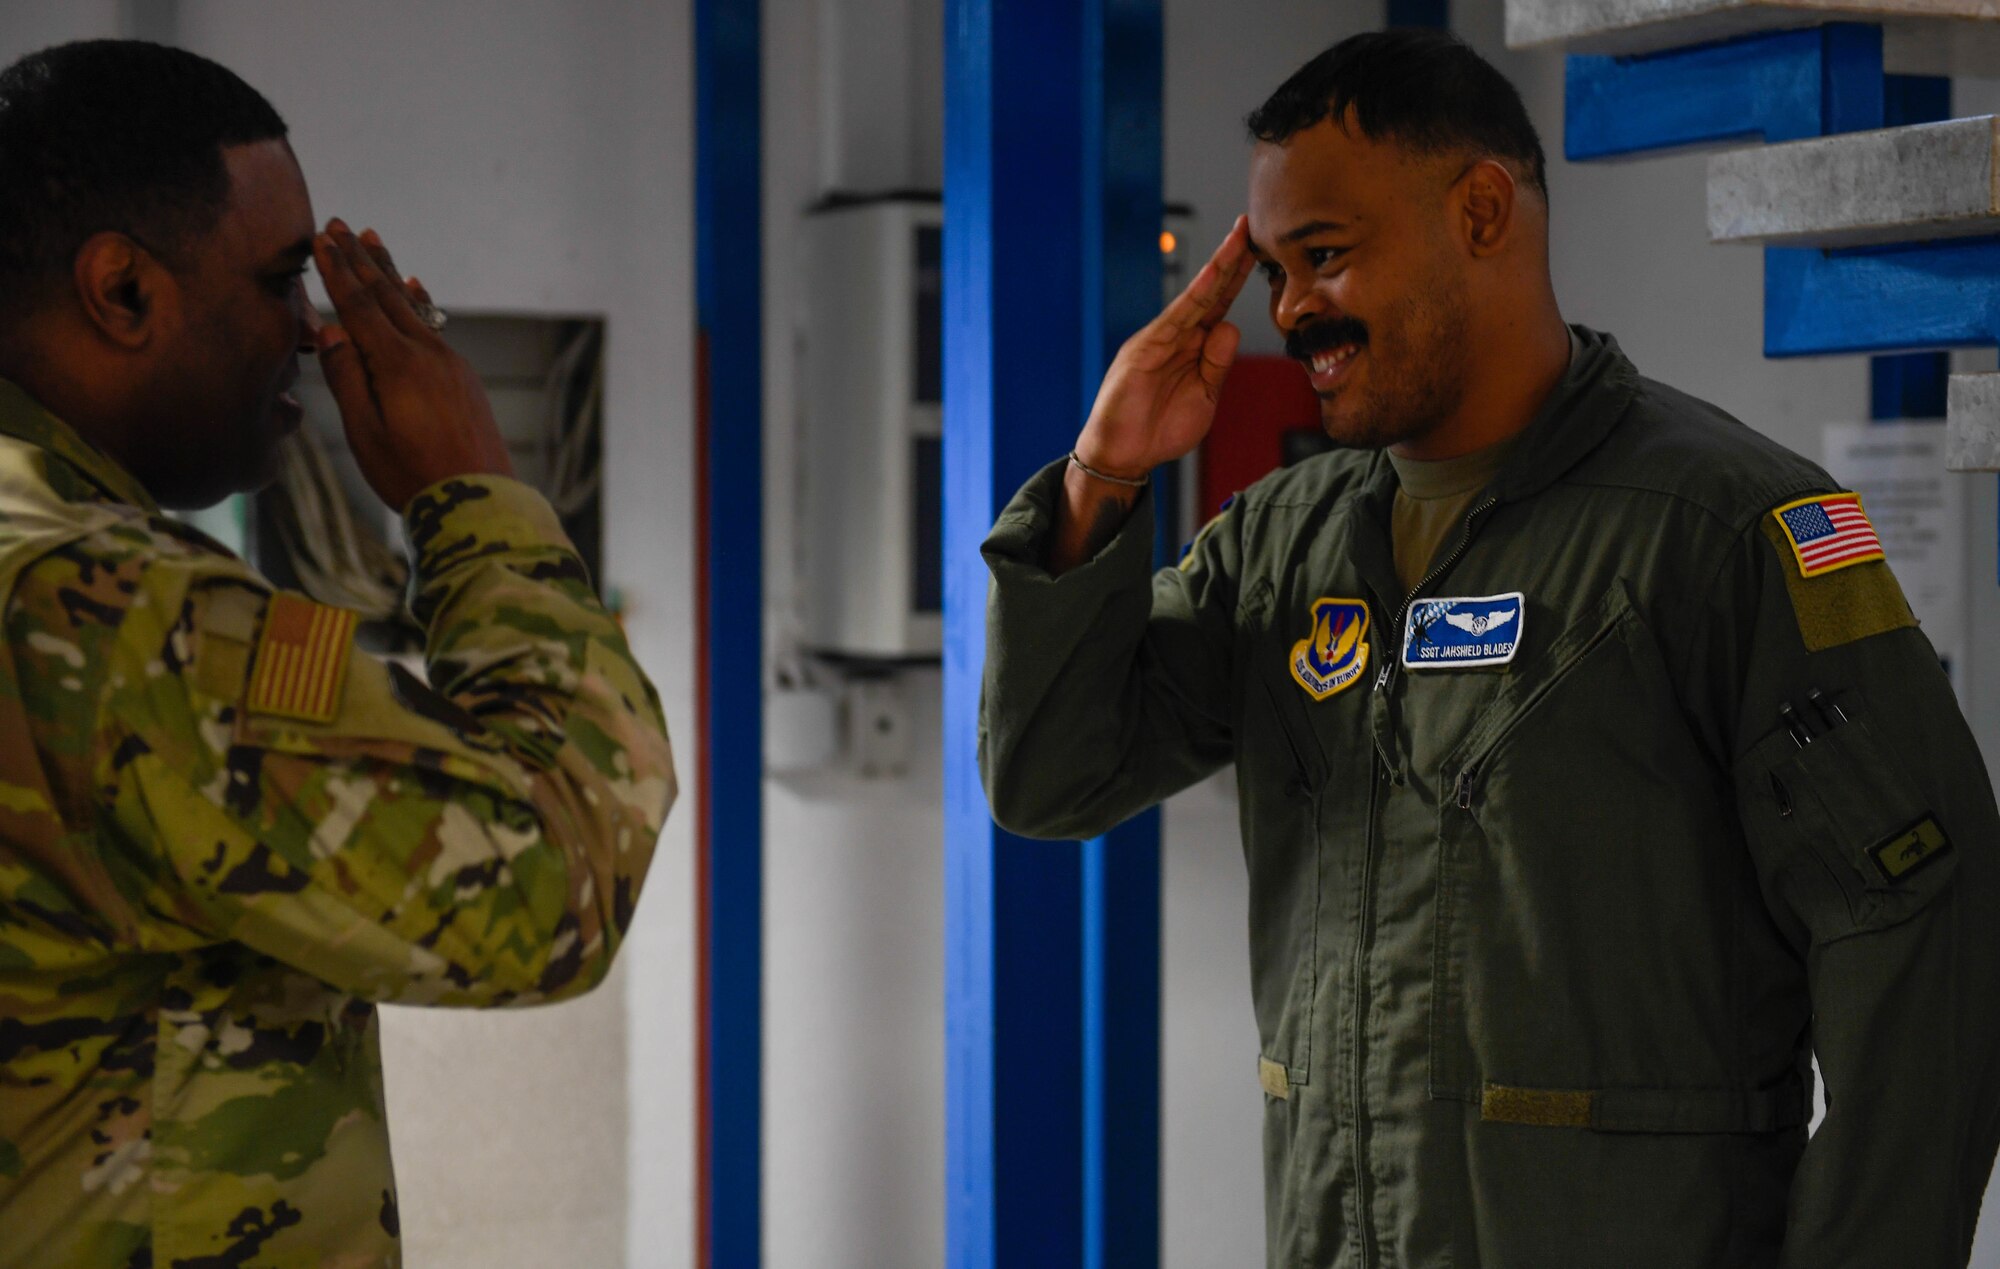 U.S. Air Force Staff Sgt. Jashield Blades, 37th Airlift Squadron noncommissioned officer in charge of loadmaster development, salutes after being coined by Brig. Gen. Otis C. Jones, 86th Airlift Wing commander at Ramstein Air Base, Germany, Jan. 12, 2023. Blades was announced as Airlifter of the Week for displaying exceptional leadership in his first six months on station.